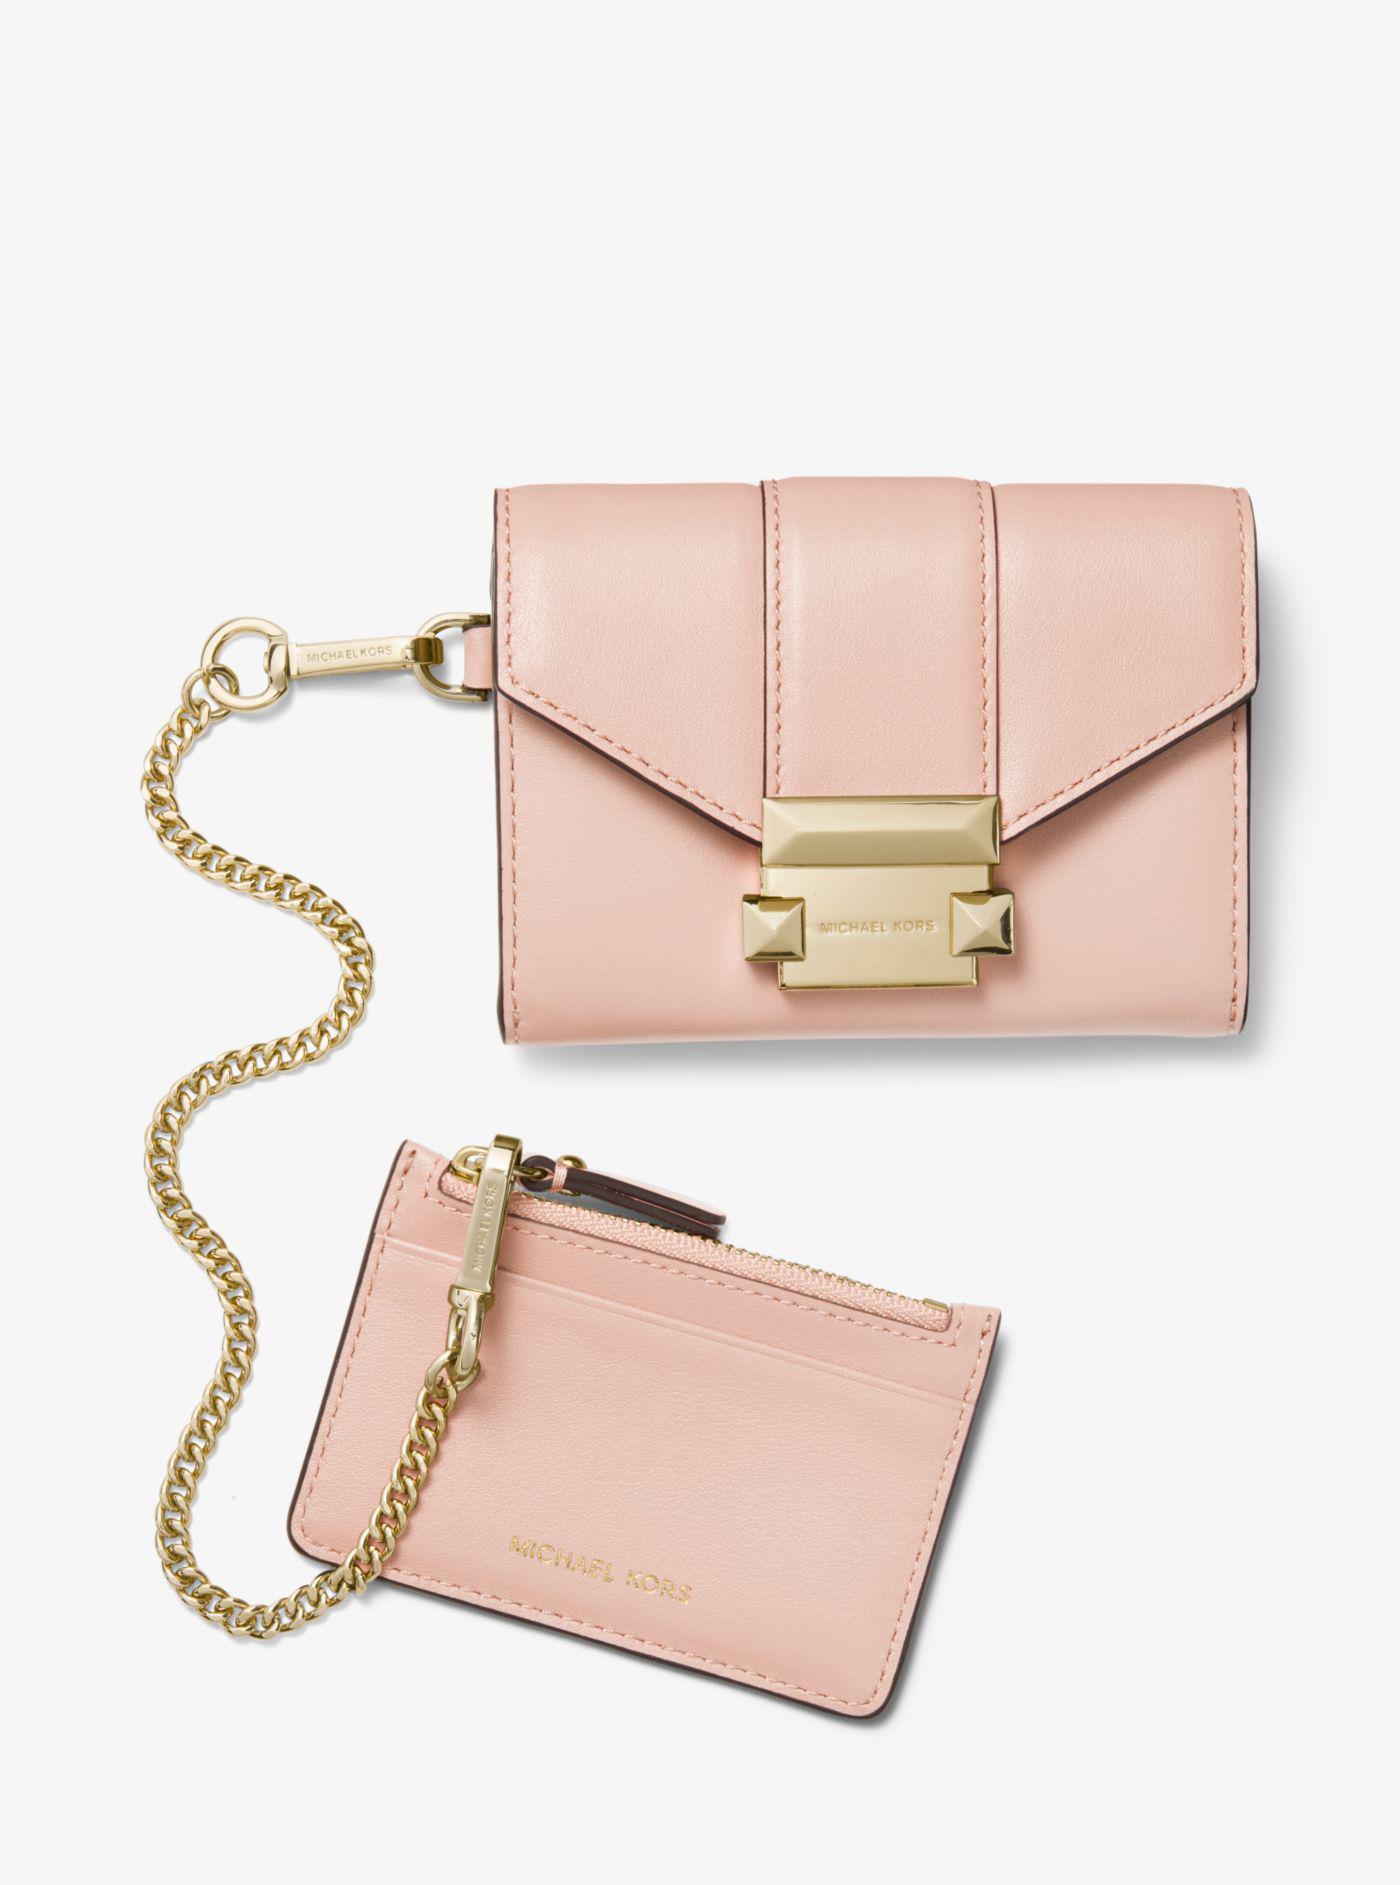 fængelsflugt visuel Sved Michael Kors Whitney Small Leather Chain Wallet in Soft Pink (Pink) - Lyst